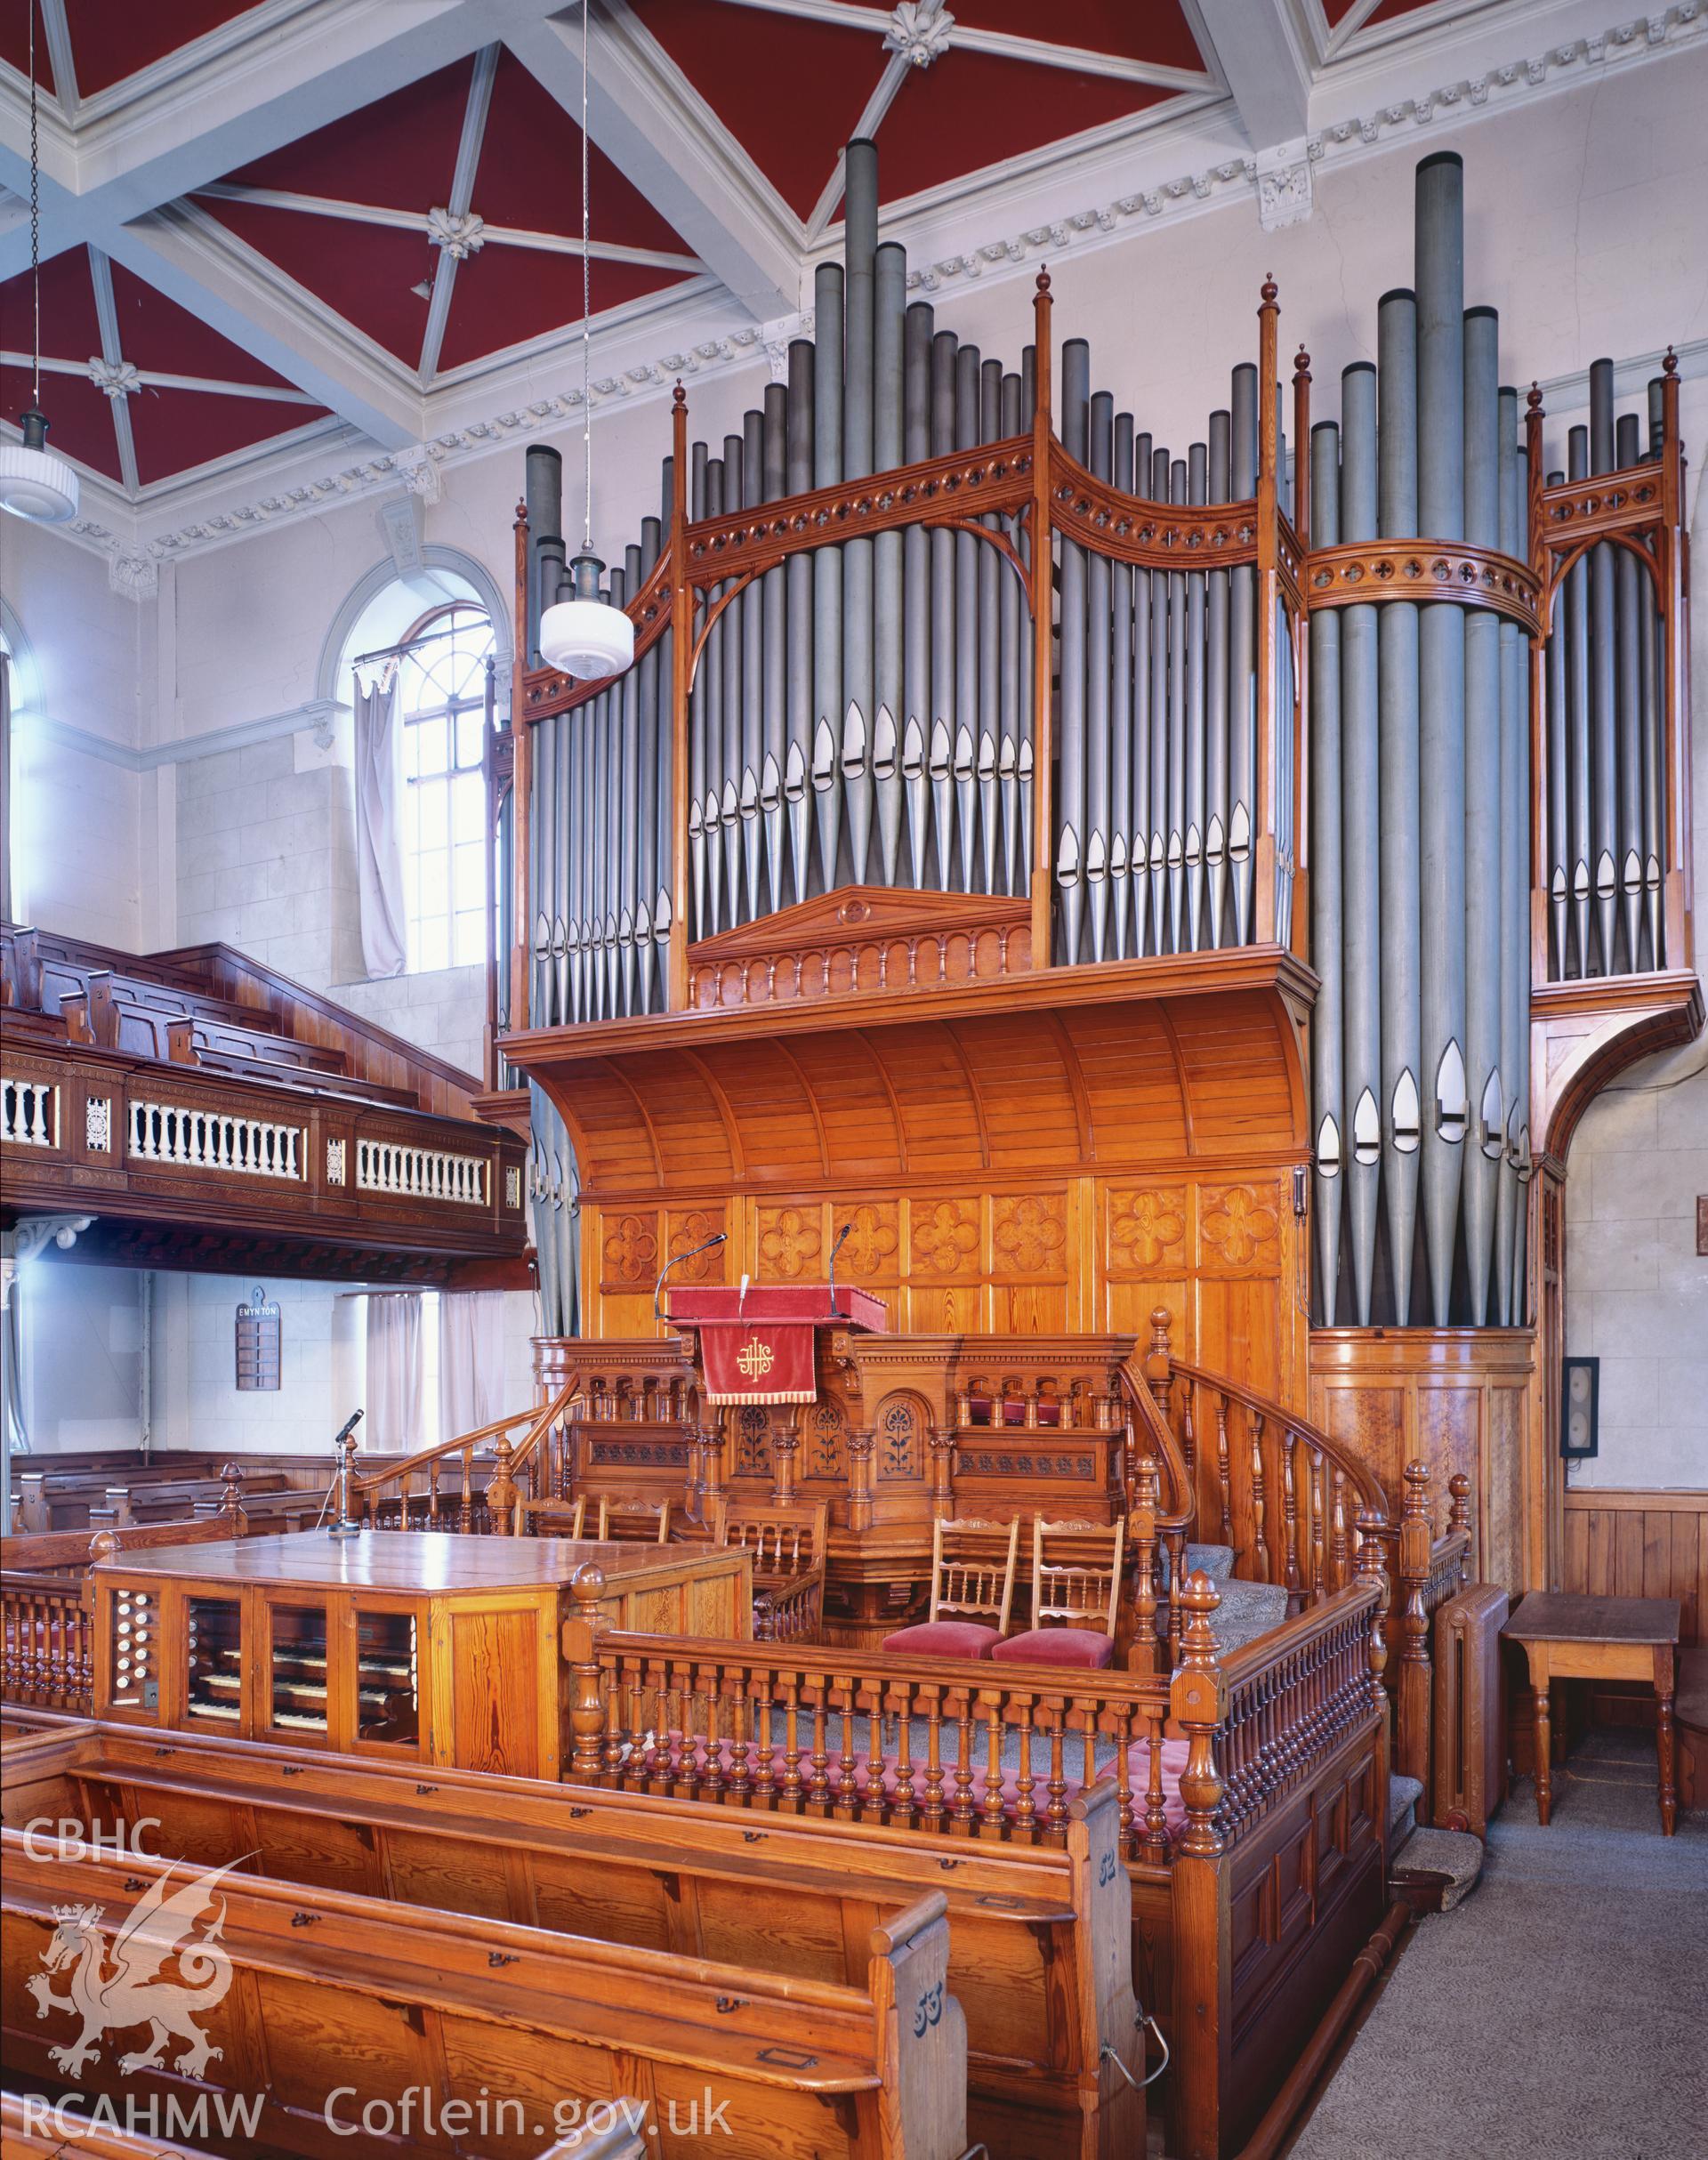 RCAHMW colour transparency showing the organ at Tabernacle Chapel, Aberystwyth, photographed by Iain Wright, 1997.